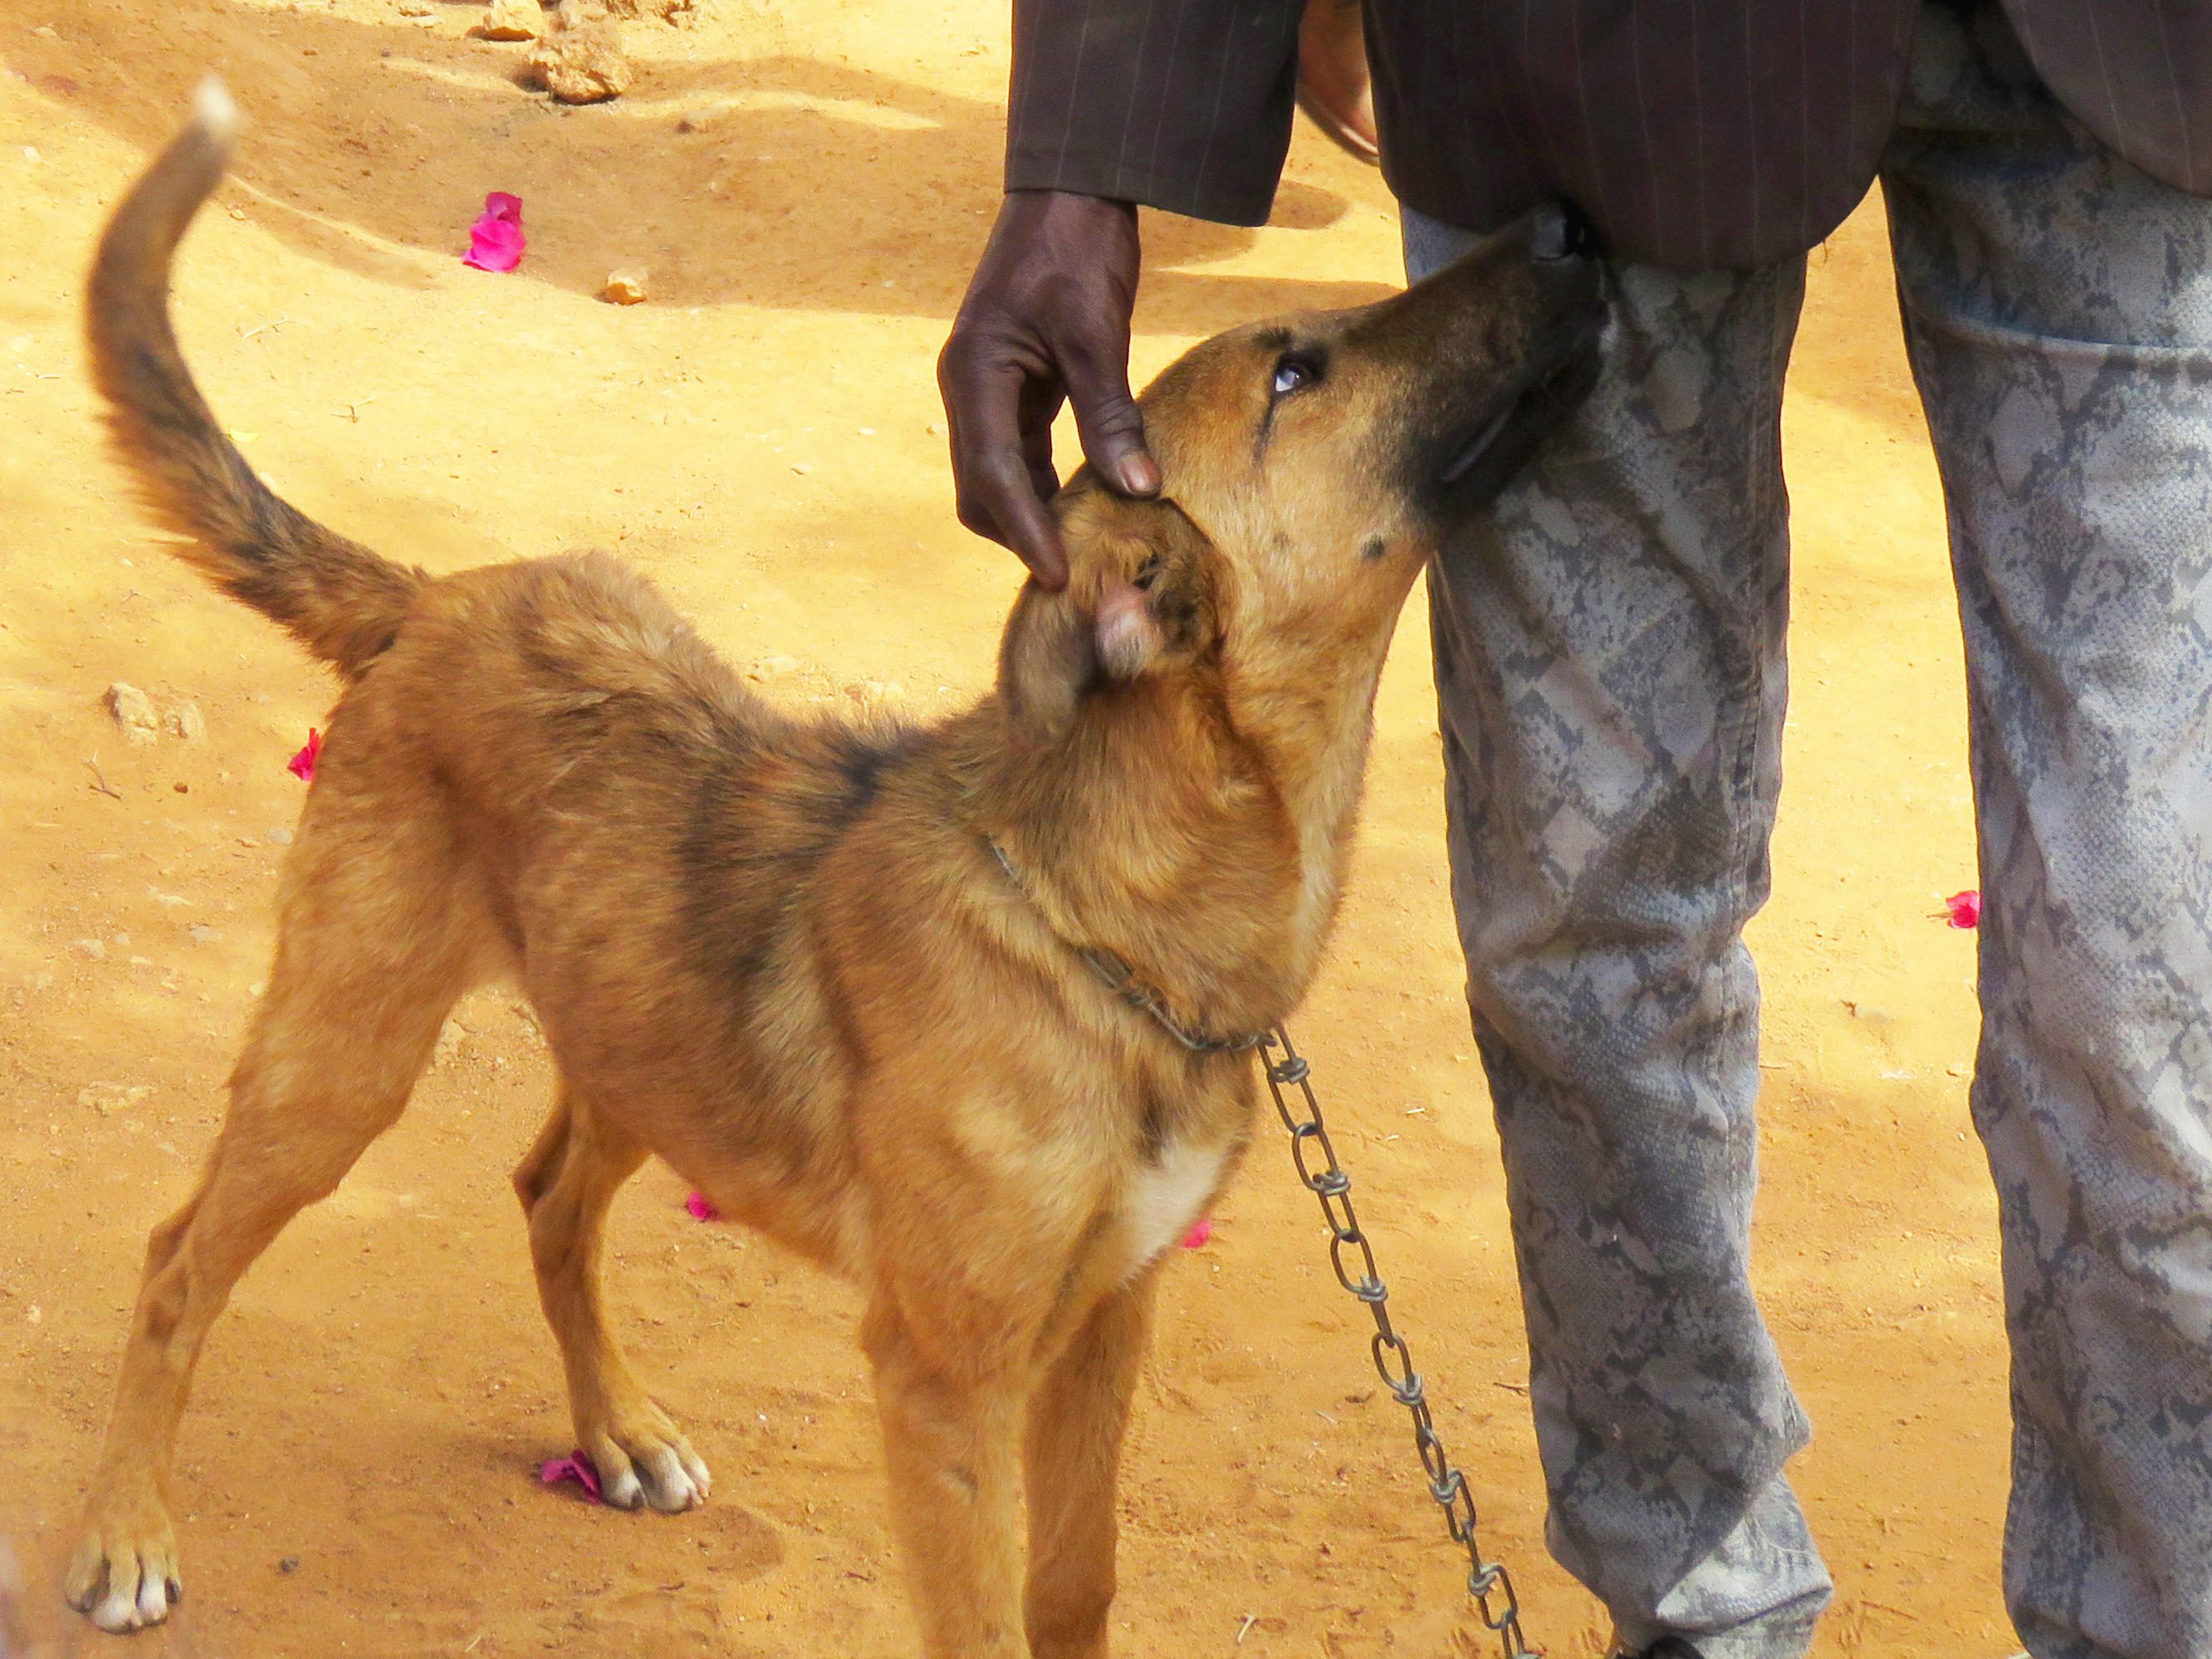 A dog with a chain collar and leash stands beside a person's legs. The person is petting the dog's head.